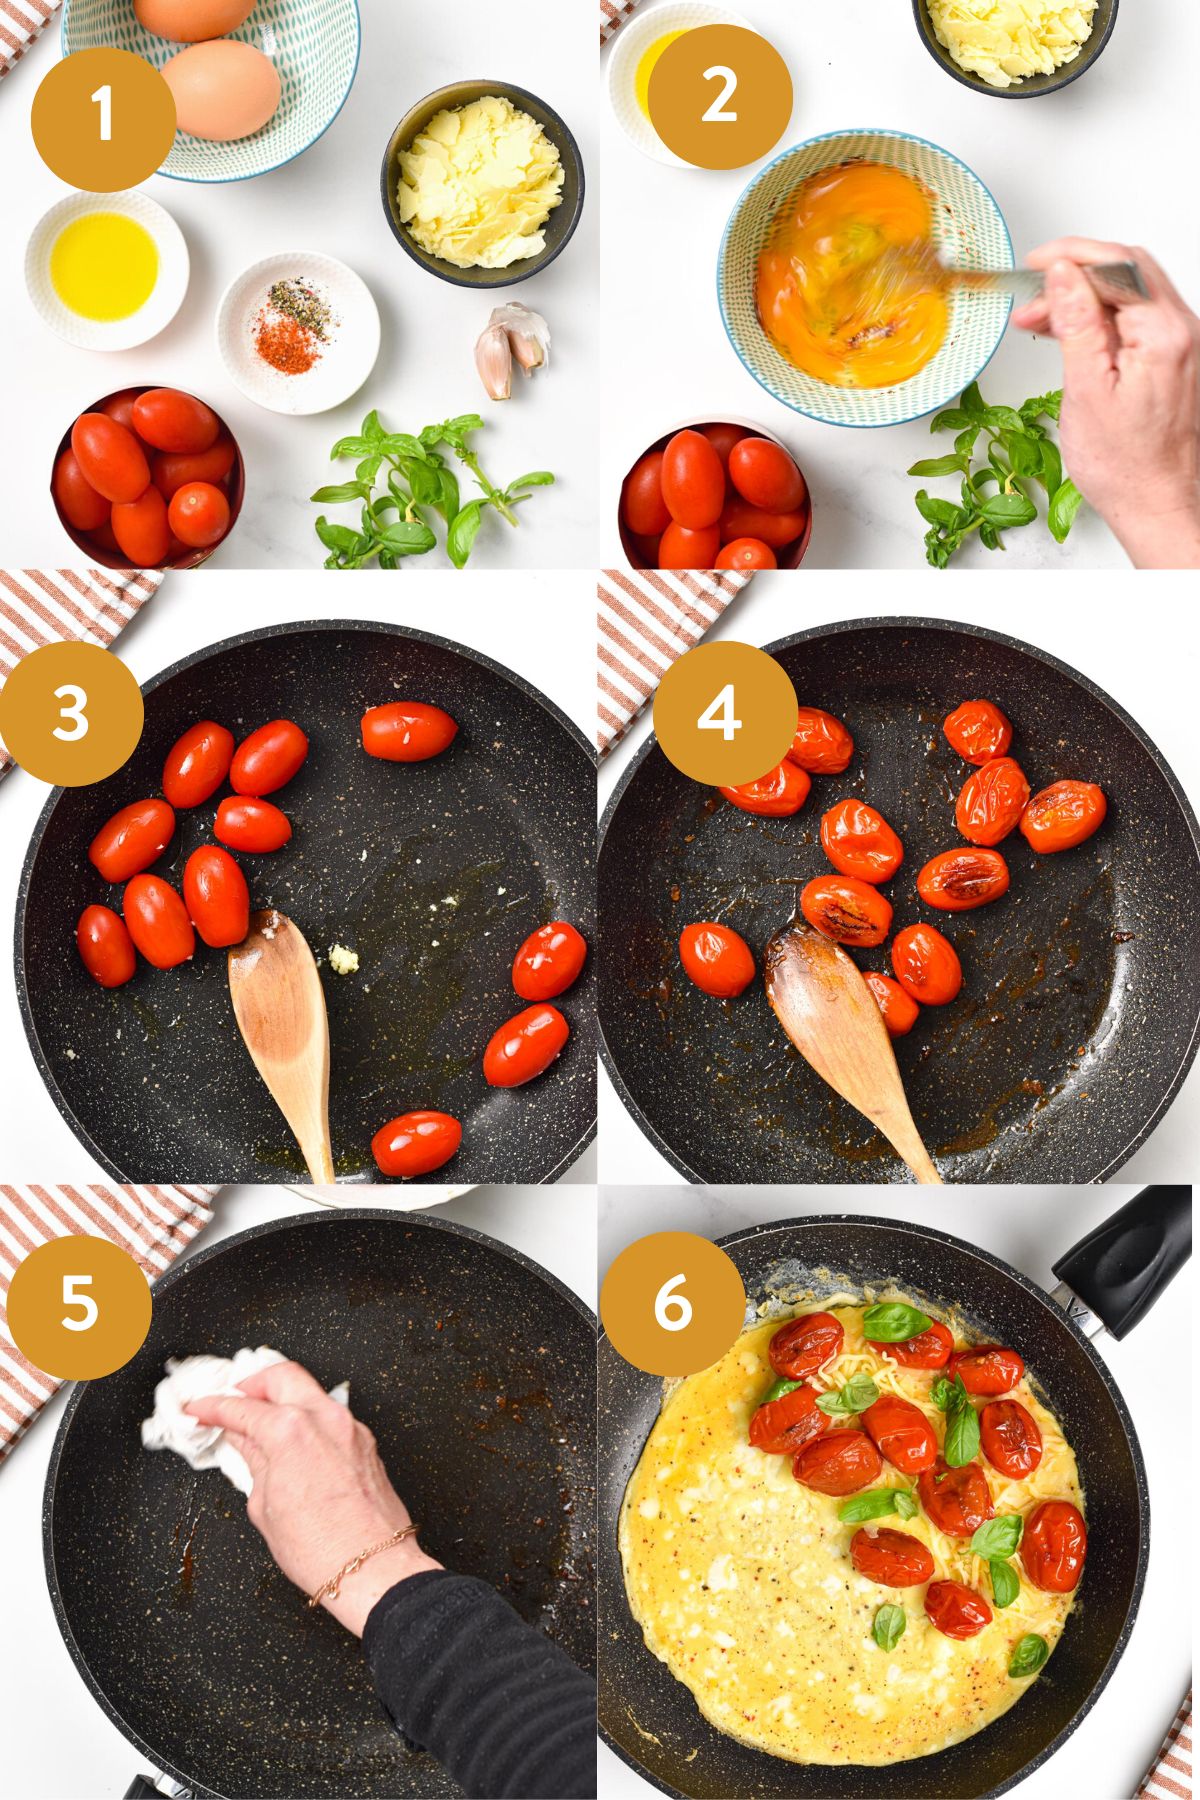 This Tomato Omelette is an easy, healthy breakfast recipe packed with summer flavors from juicy pan-fried cherry tomatoes, basil, and Parmesan cheese. If you love your eggs for breakfast, or you are looking for a fancy brunch, this omelette with tomato basil is a must-try.